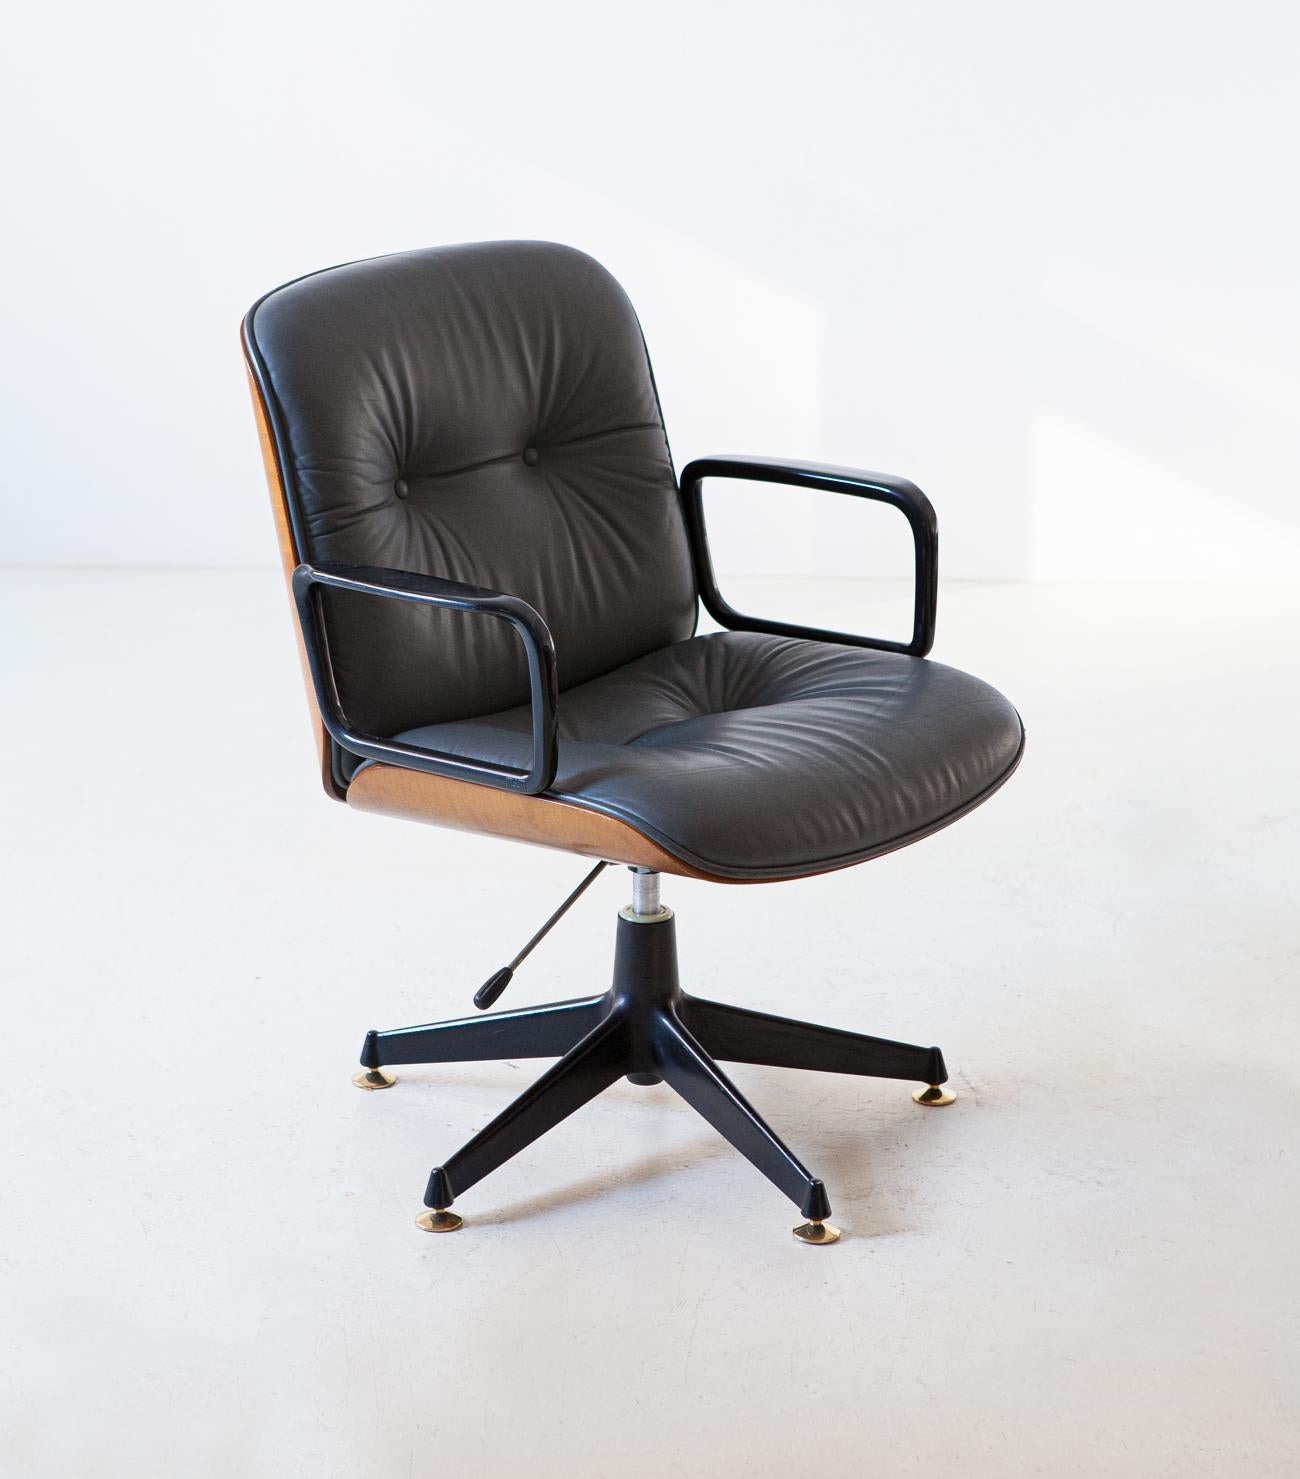 Office swivel chair with armrests and high back designed by Ico Parisi and produced by M.I.M. (Mobili Italiani Moderni) Roma, Italy, 1960s.

Curved light walnut frame, metal legs, brass feets and original genuine grey leather in very good